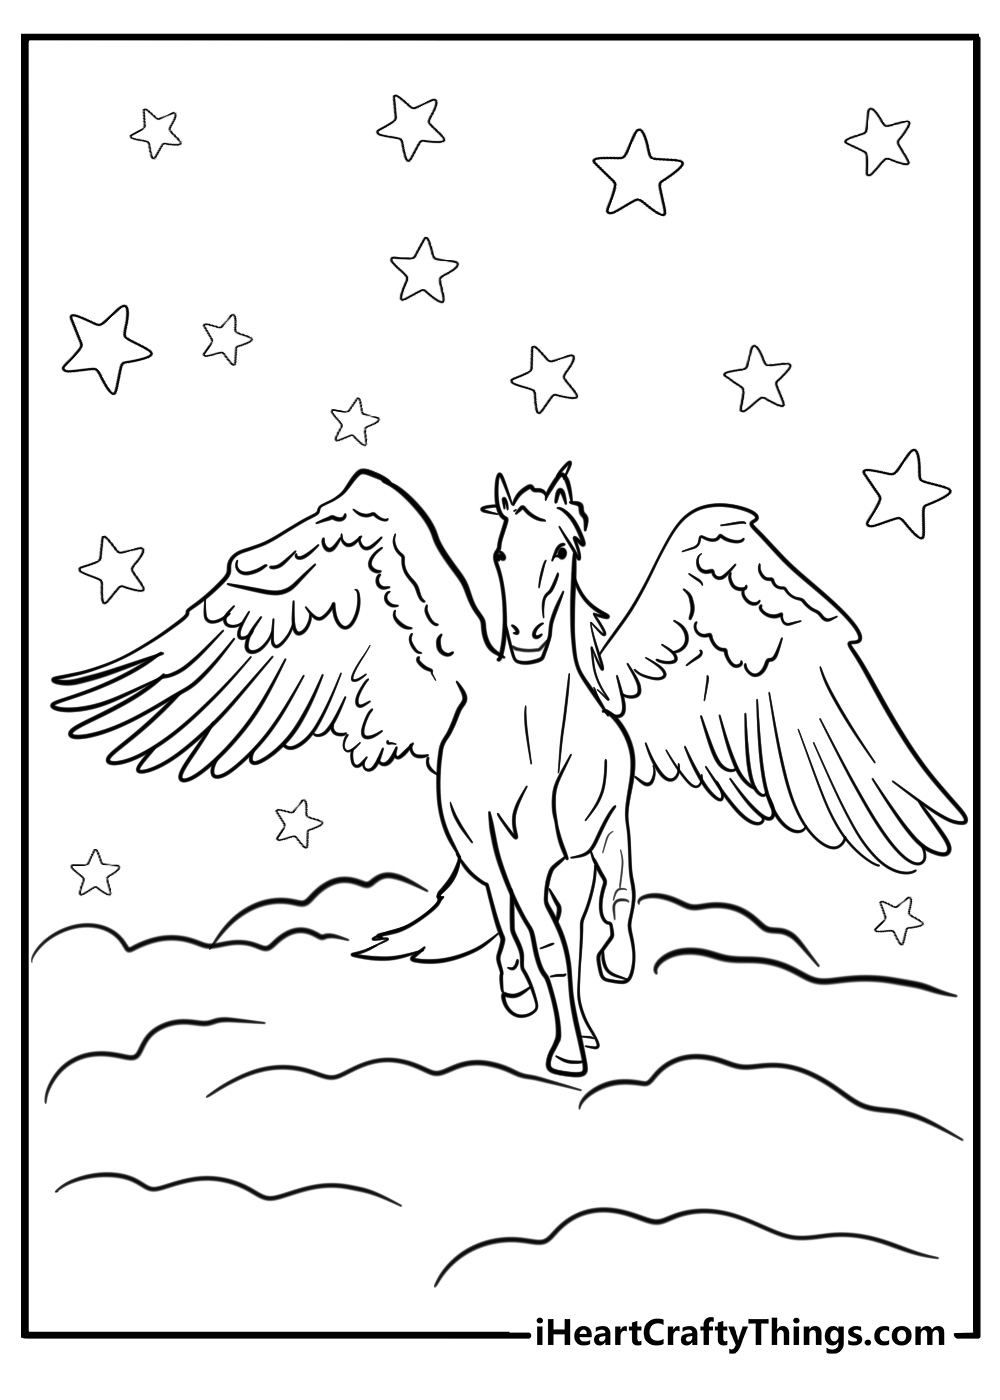 Pegasus coloring page spreading his wings